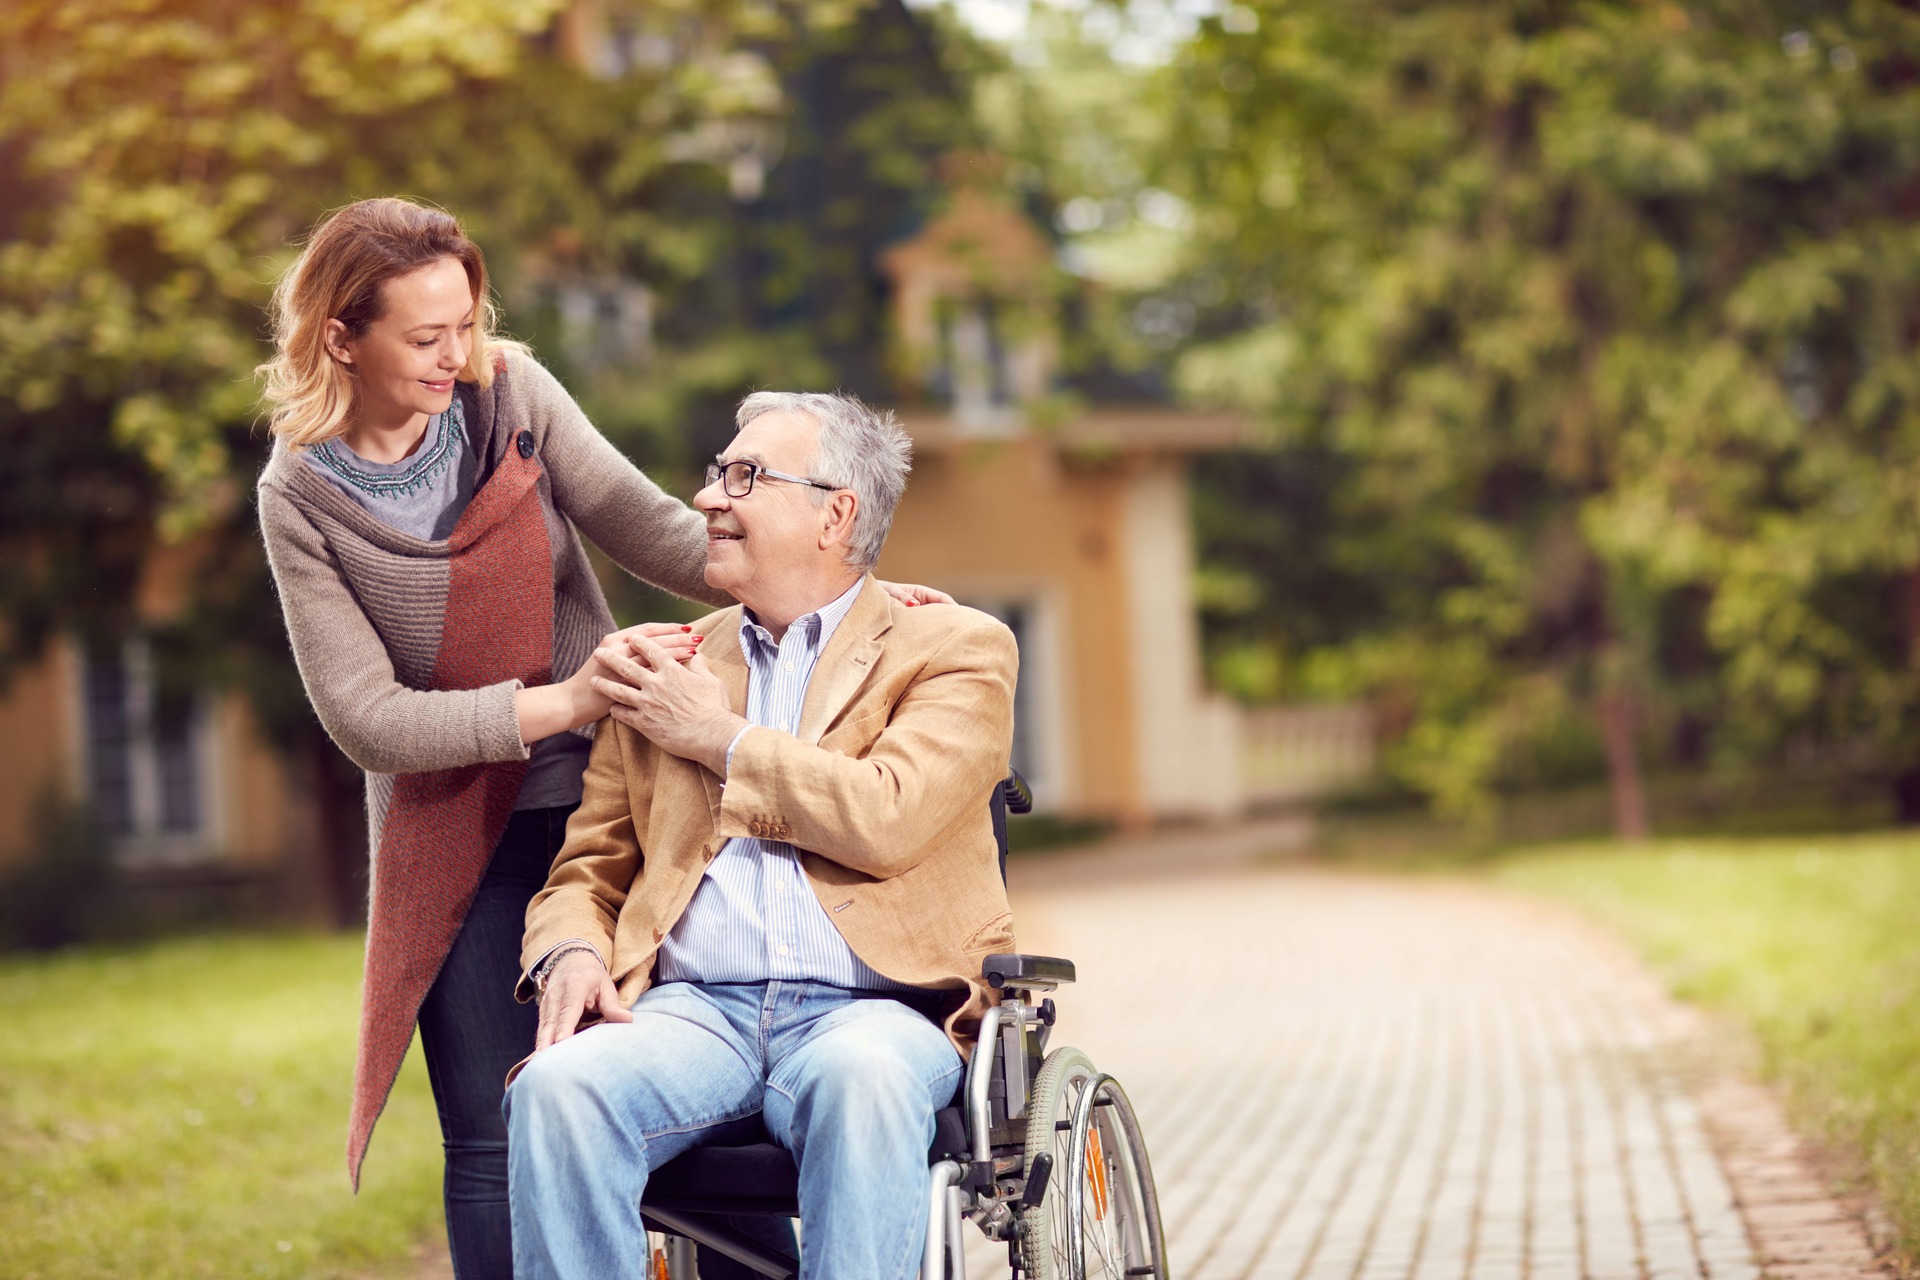 10 Important Questions To Consider Before Hiring A Caregiver For A Loved One